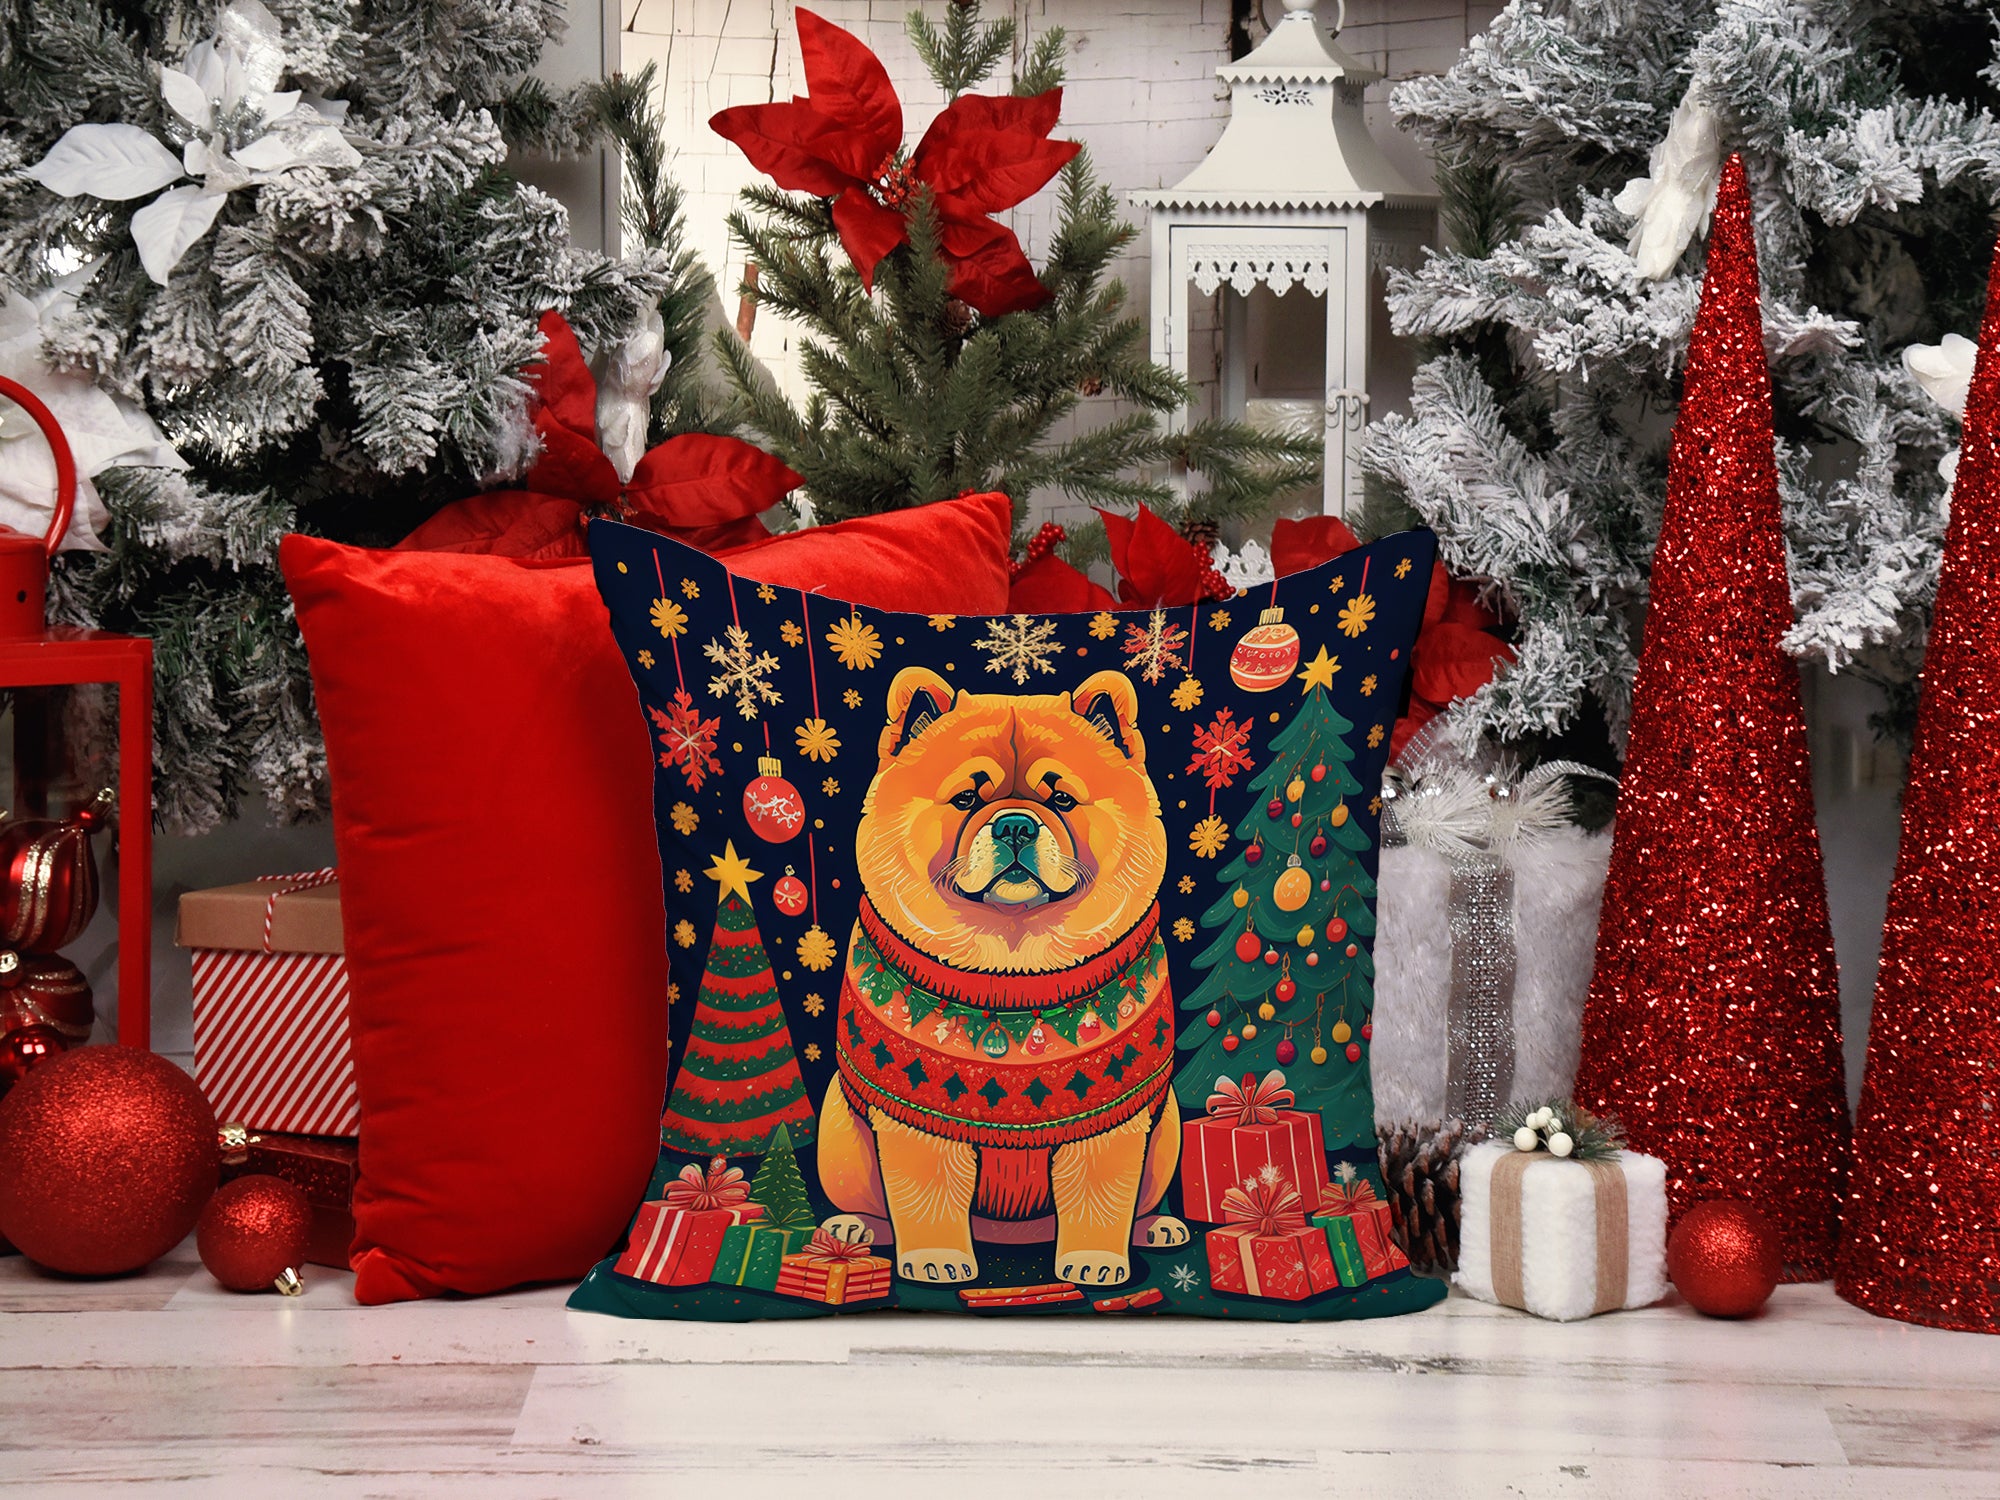 Buy this Chow Chow Christmas Fabric Decorative Pillow